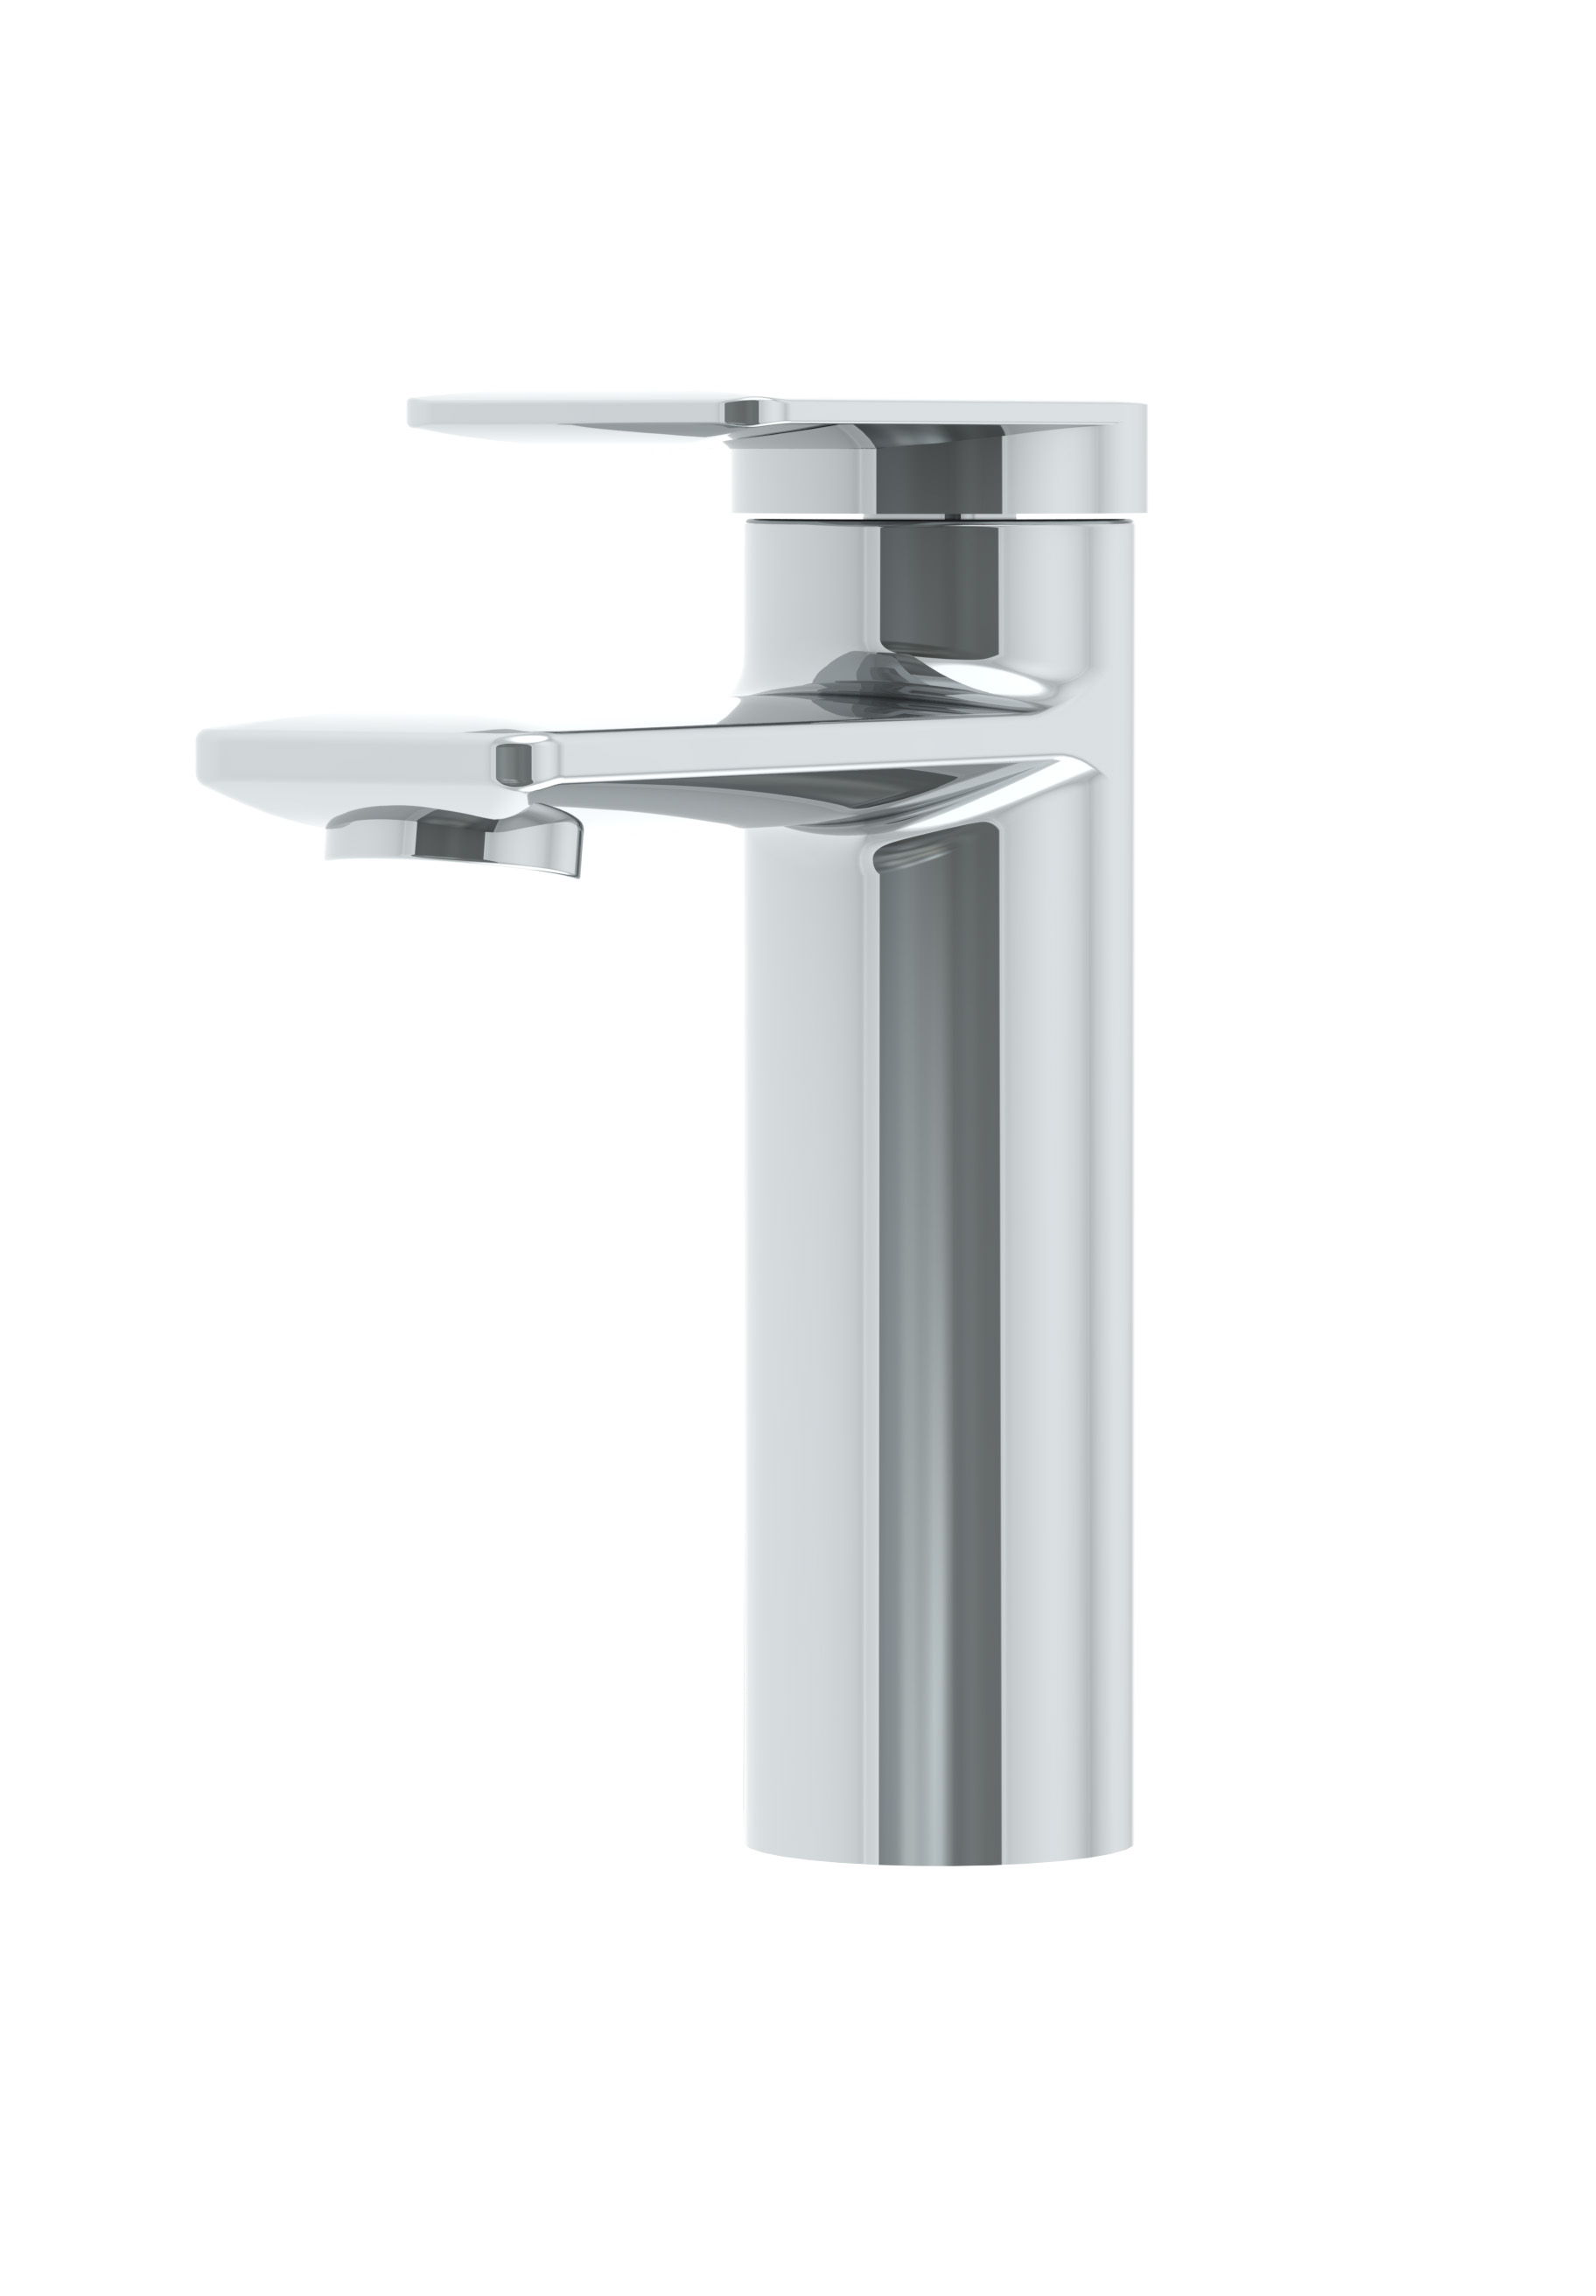 Dieppe Single Hole Single-Handle Bathroom Faucet 1.2 gpm/ 4.5 L/min With Lever Handle